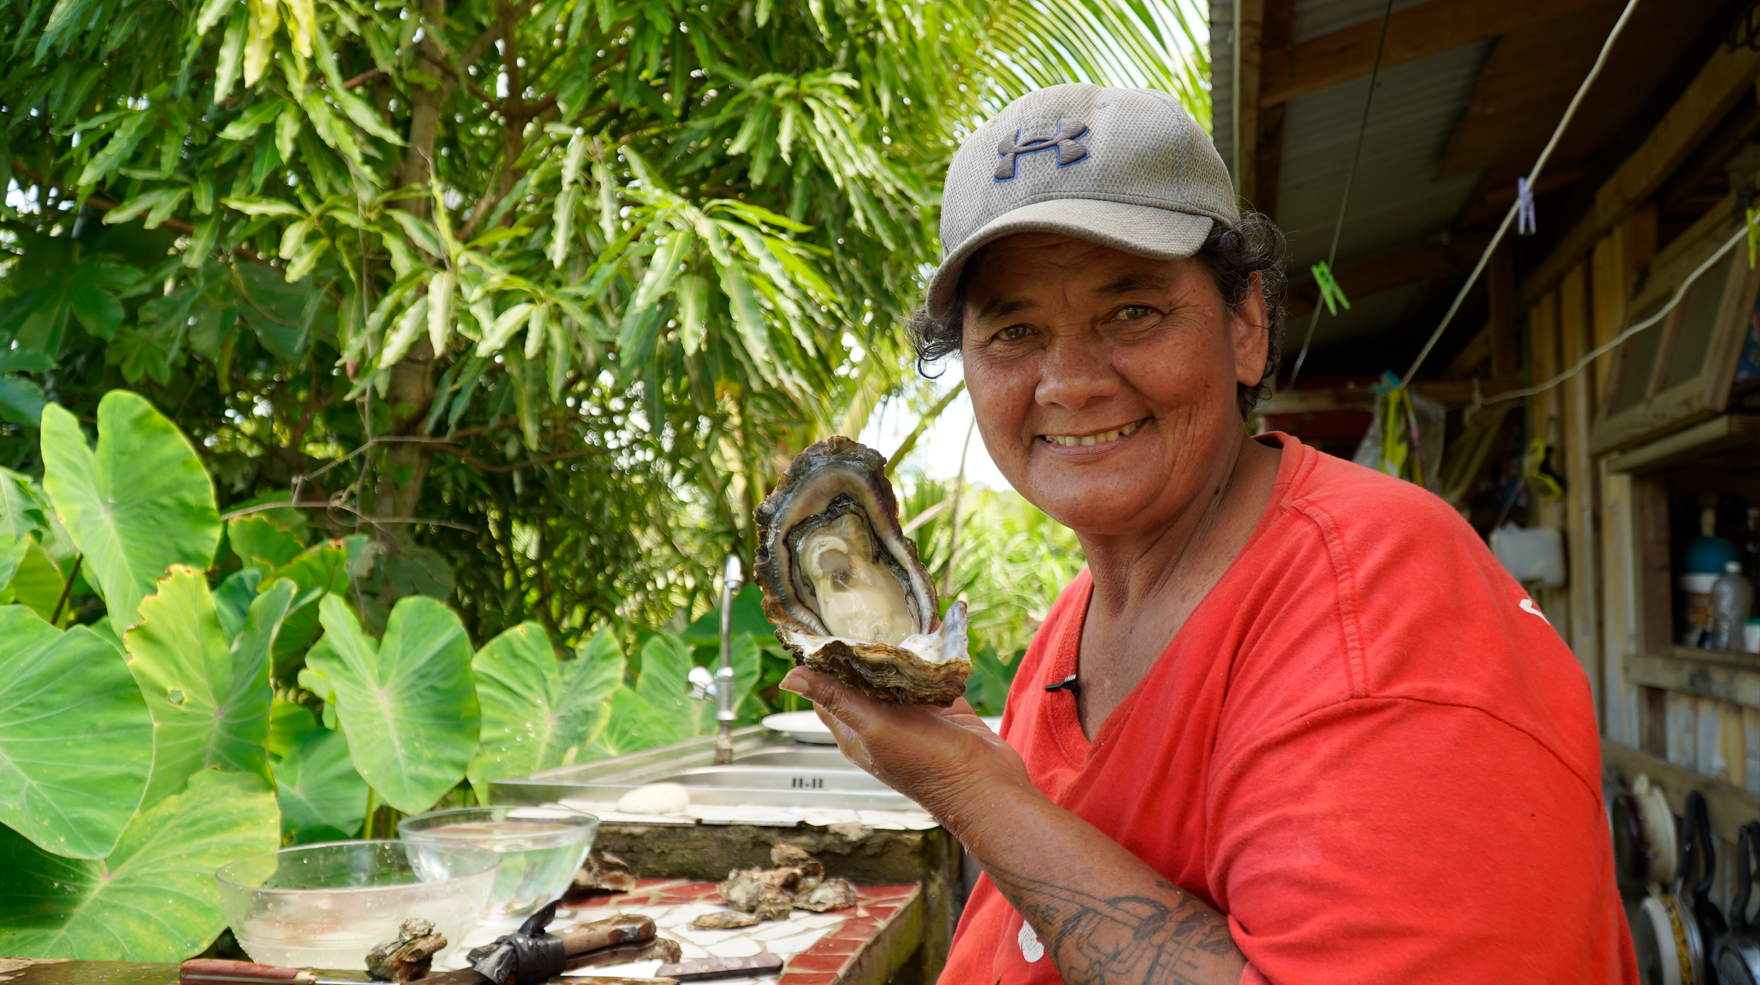 Women in fisheries - Oysters in French Polynesia